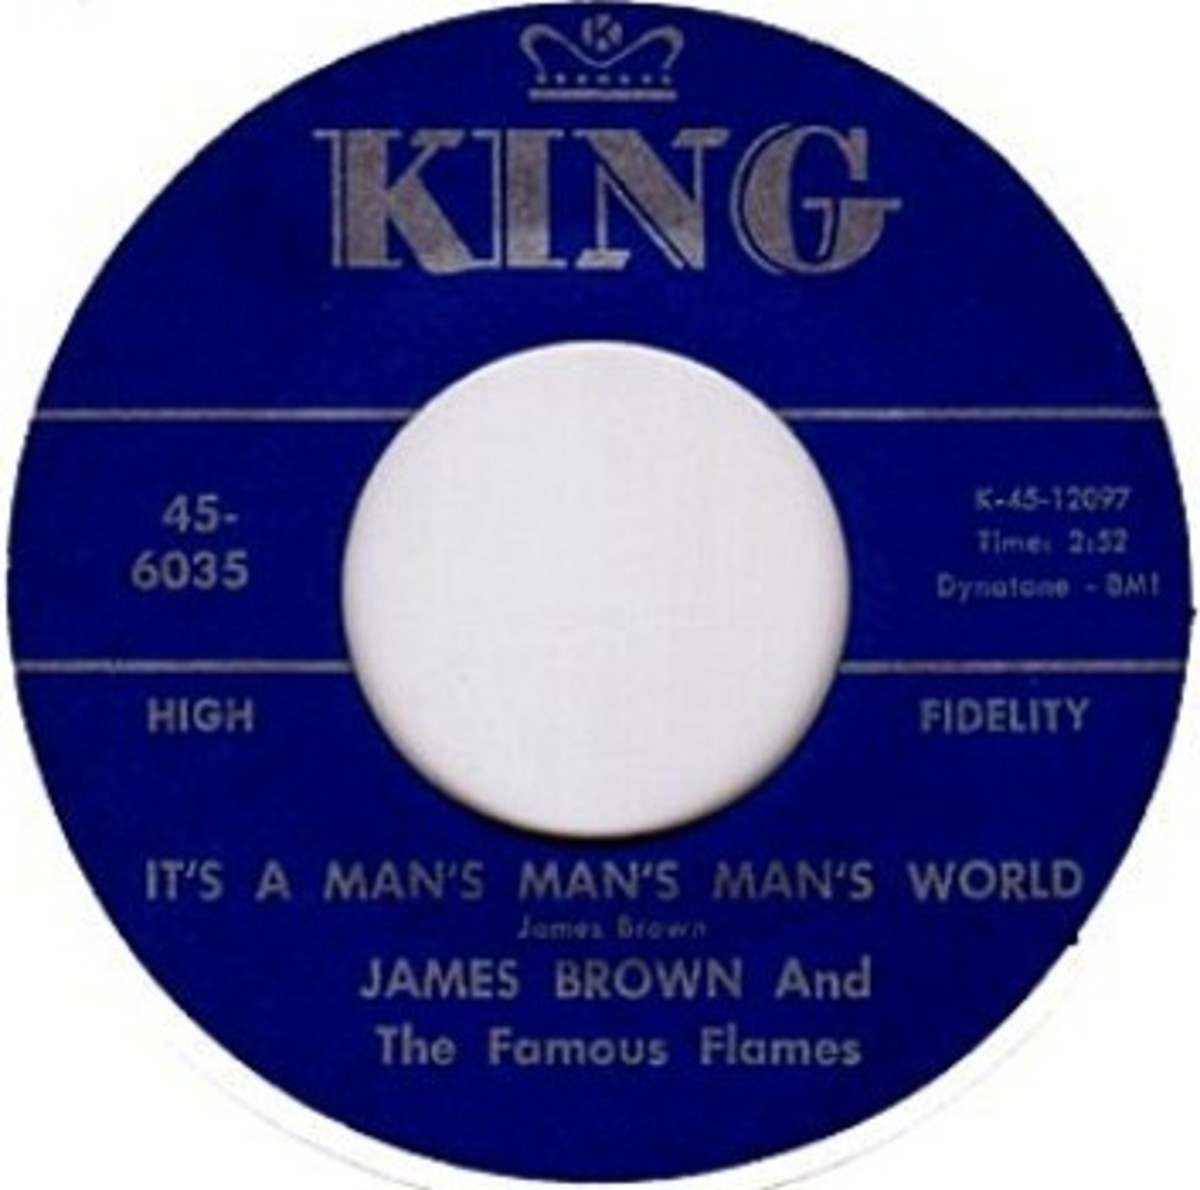  Betty Newsome's name does not appear on this King 45